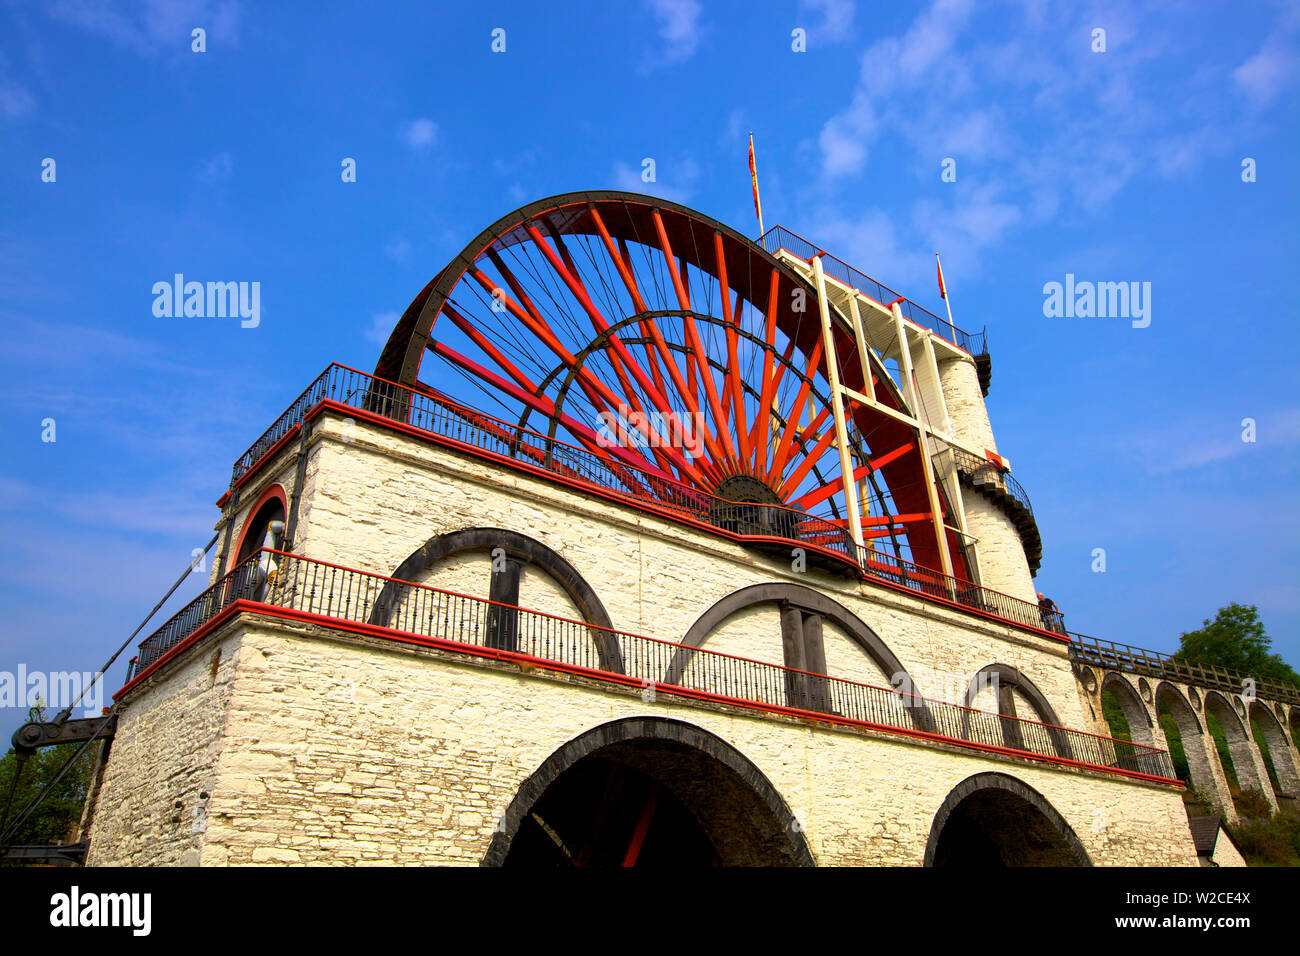 Laxey Wheel, Laxey, Isle of Man Stock Photo